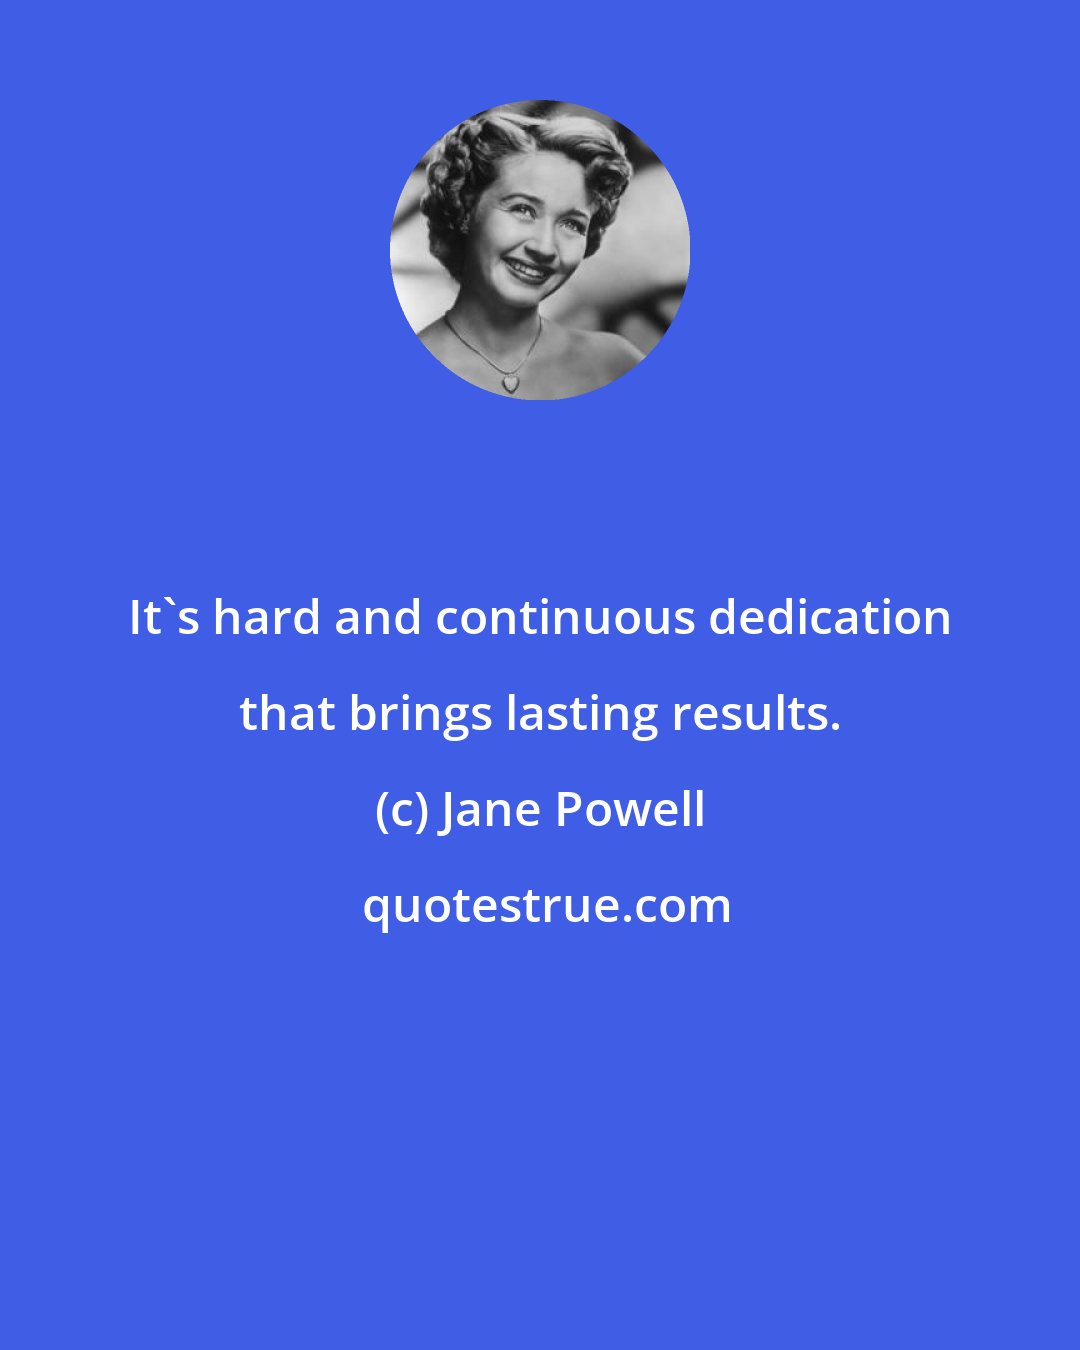 Jane Powell: It's hard and continuous dedication that brings lasting results.